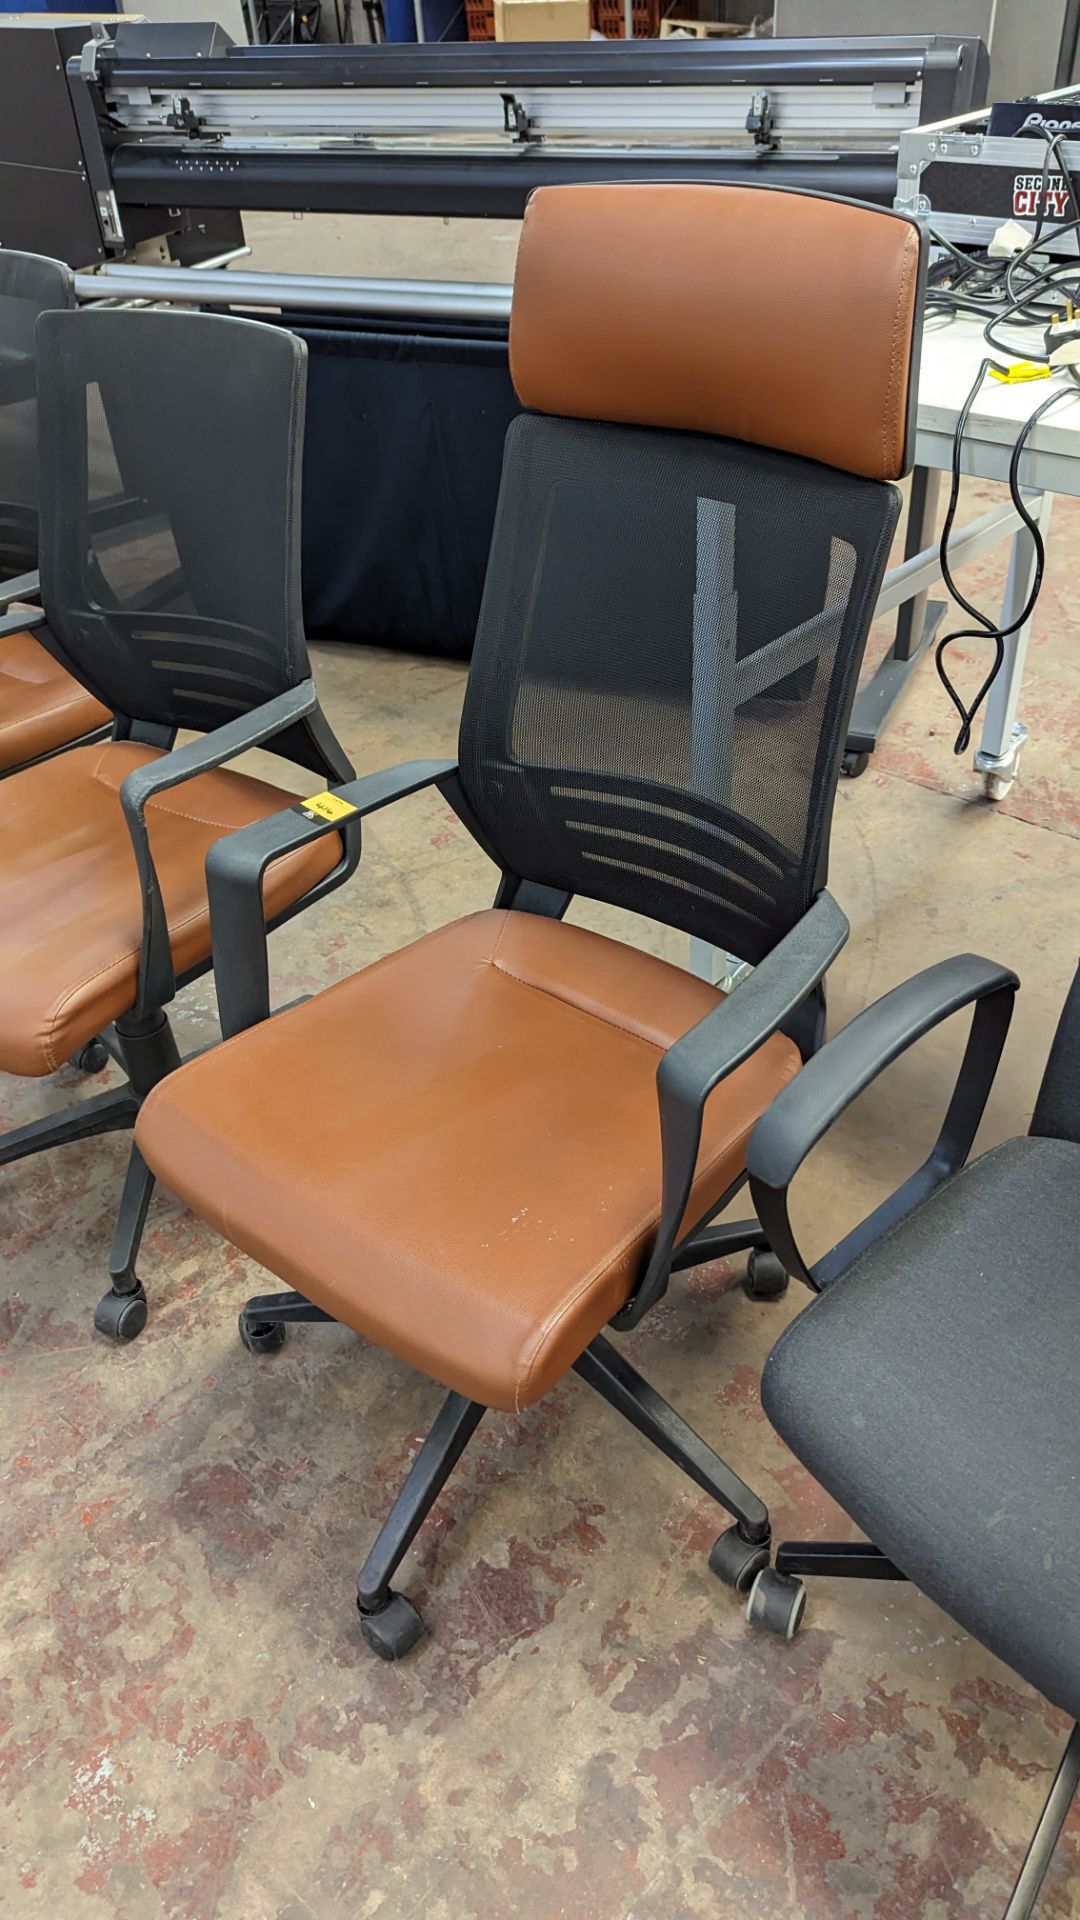 4 off matching modern mesh back chairs with brown leather/leather look seat bases, one of which has - Image 5 of 10